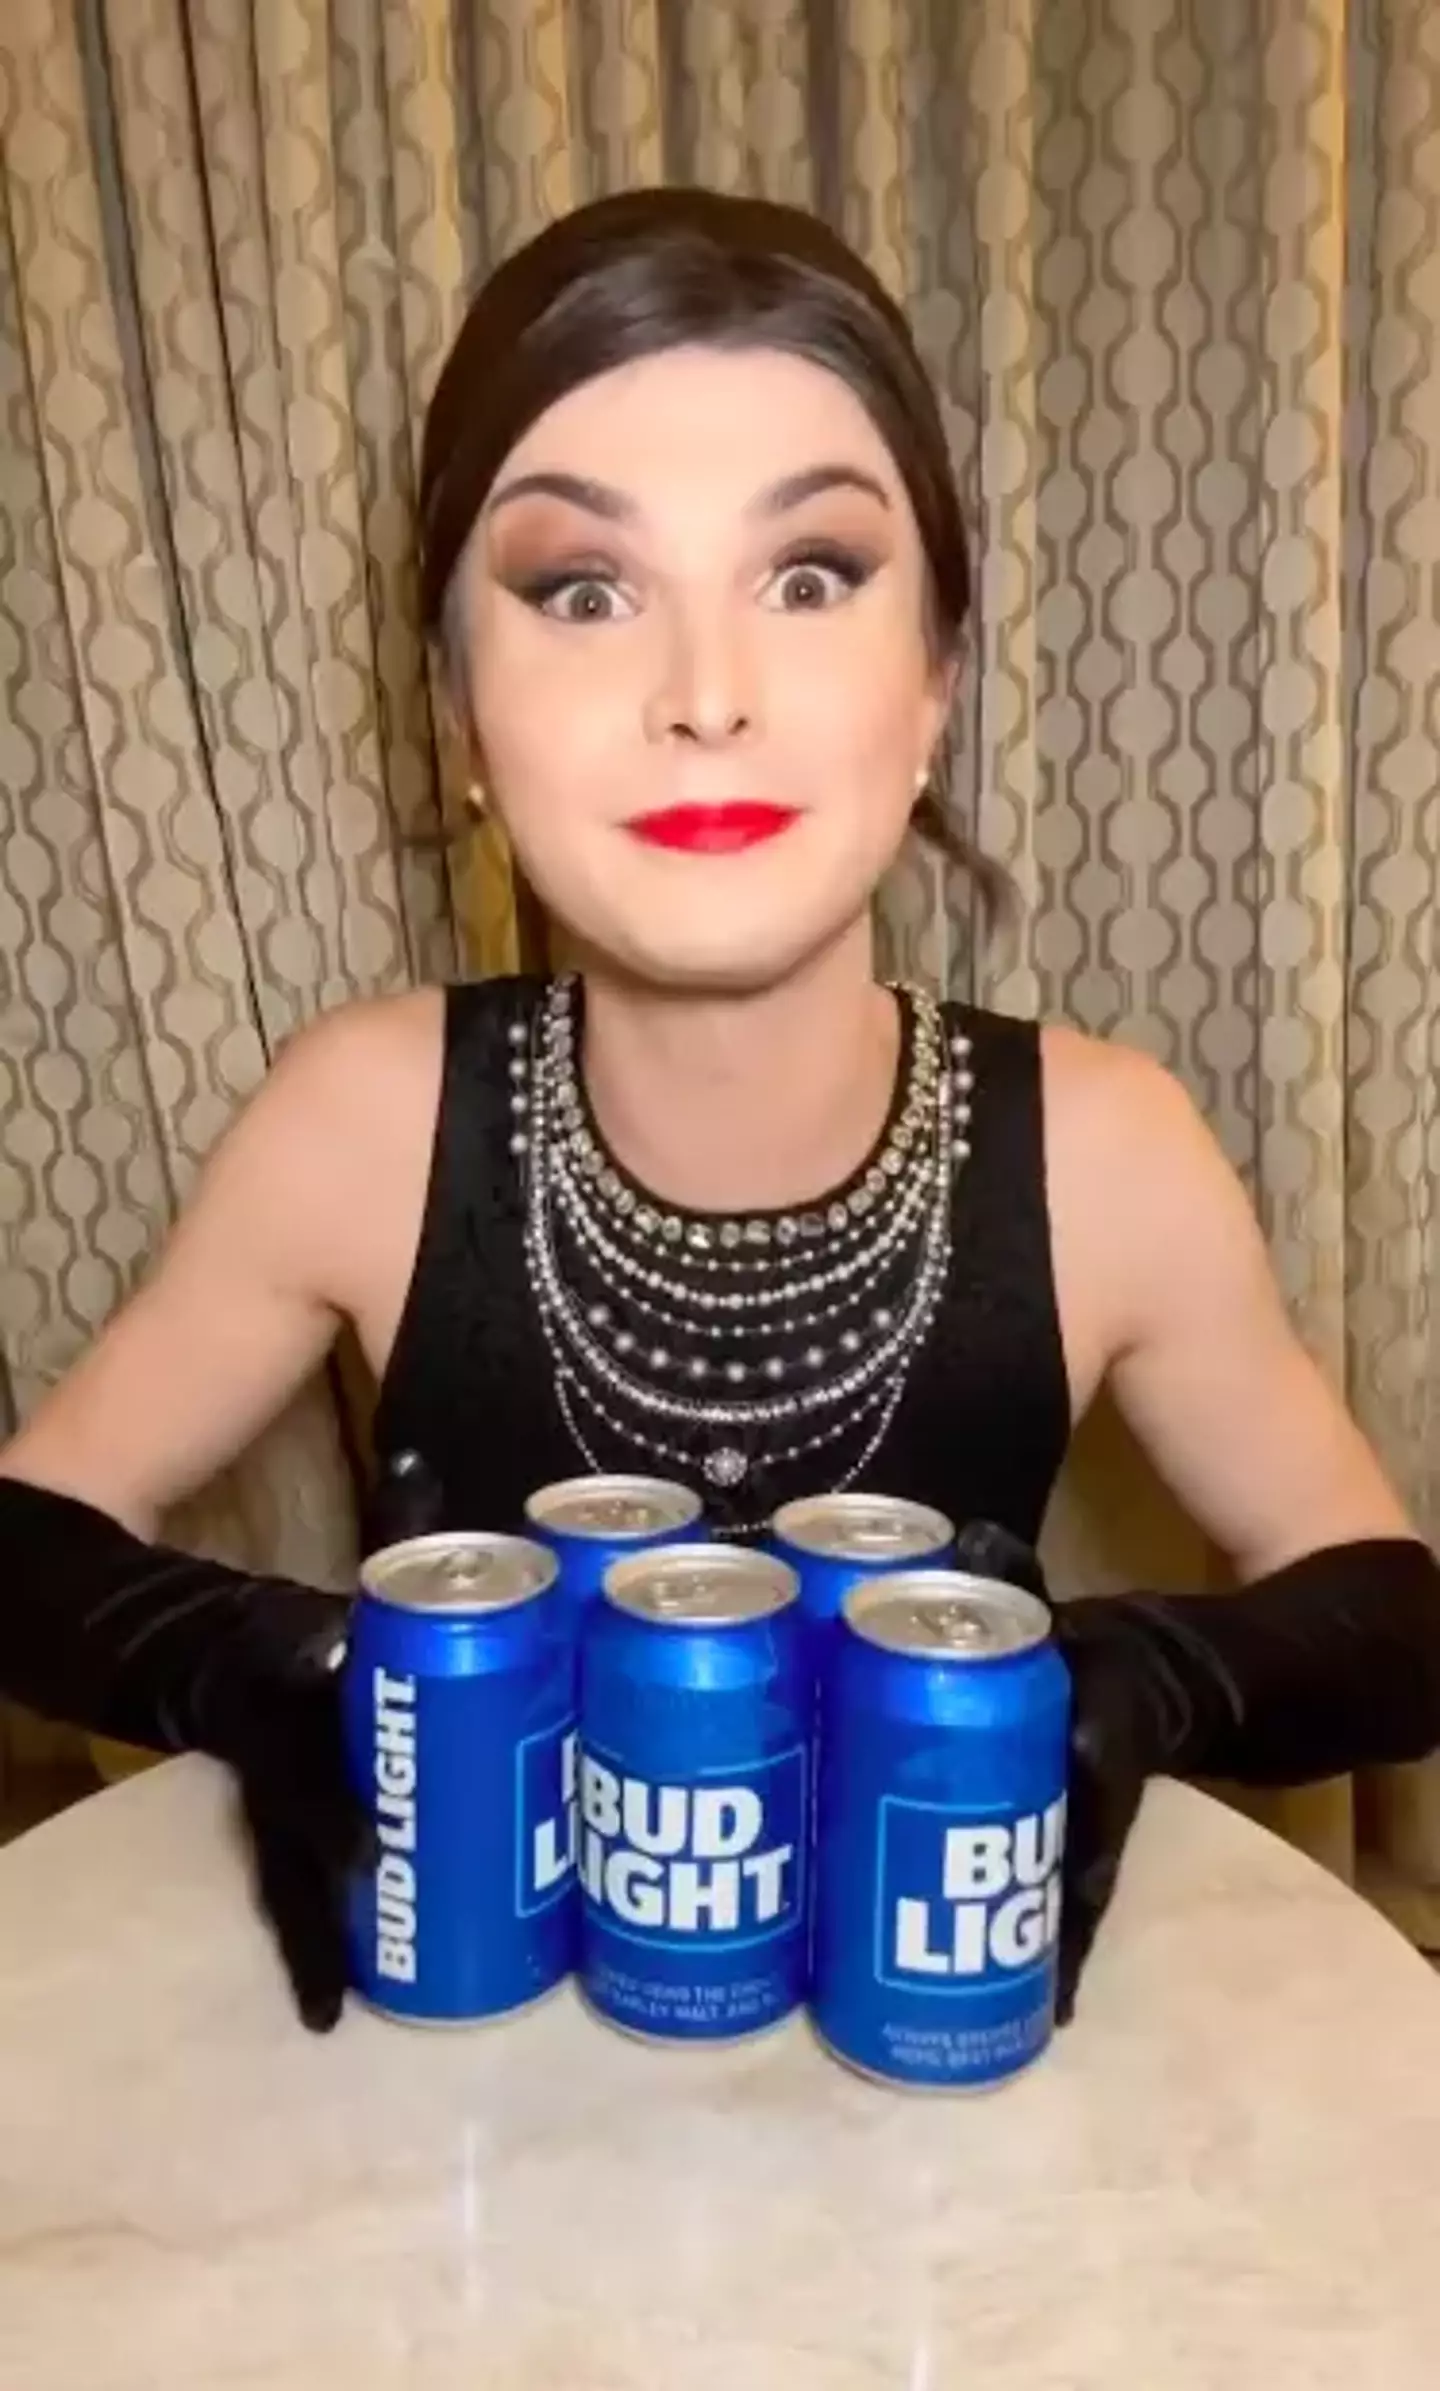 Transgender TikToker Dylan teamed up with Bud Light, much to Kid Rock's disappointment.